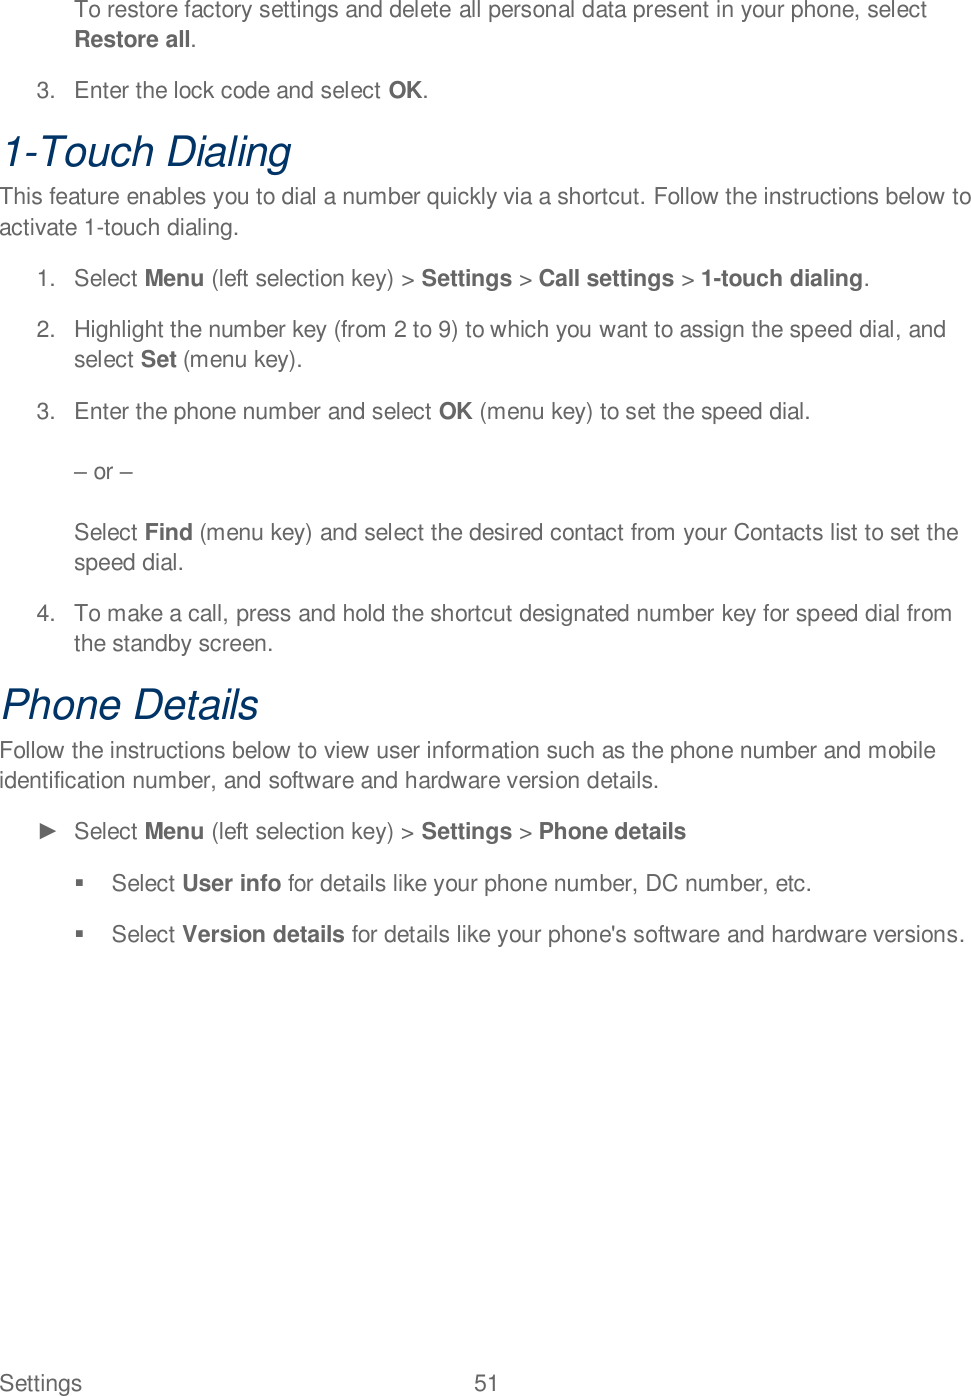 Settings  51   To restore factory settings and delete all personal data present in your phone, select Restore all. 3.  Enter the lock code and select OK. 1-Touch Dialing This feature enables you to dial a number quickly via a shortcut. Follow the instructions below to activate 1-touch dialing. 1.  Select Menu (left selection key) &gt; Settings &gt; Call settings &gt; 1-touch dialing. 2.  Highlight the number key (from 2 to 9) to which you want to assign the speed dial, and select Set (menu key).  3.  Enter the phone number and select OK (menu key) to set the speed dial.   or   Select Find (menu key) and select the desired contact from your Contacts list to set the speed dial. 4.  To make a call, press and hold the shortcut designated number key for speed dial from the standby screen. Phone Details Follow the instructions below to view user information such as the phone number and mobile identification number, and software and hardware version details.   Select Menu (left selection key) &gt; Settings &gt; Phone details   Select User info for details like your phone number, DC number, etc.    Select Version details for details like your phone&apos;s software and hardware versions.  